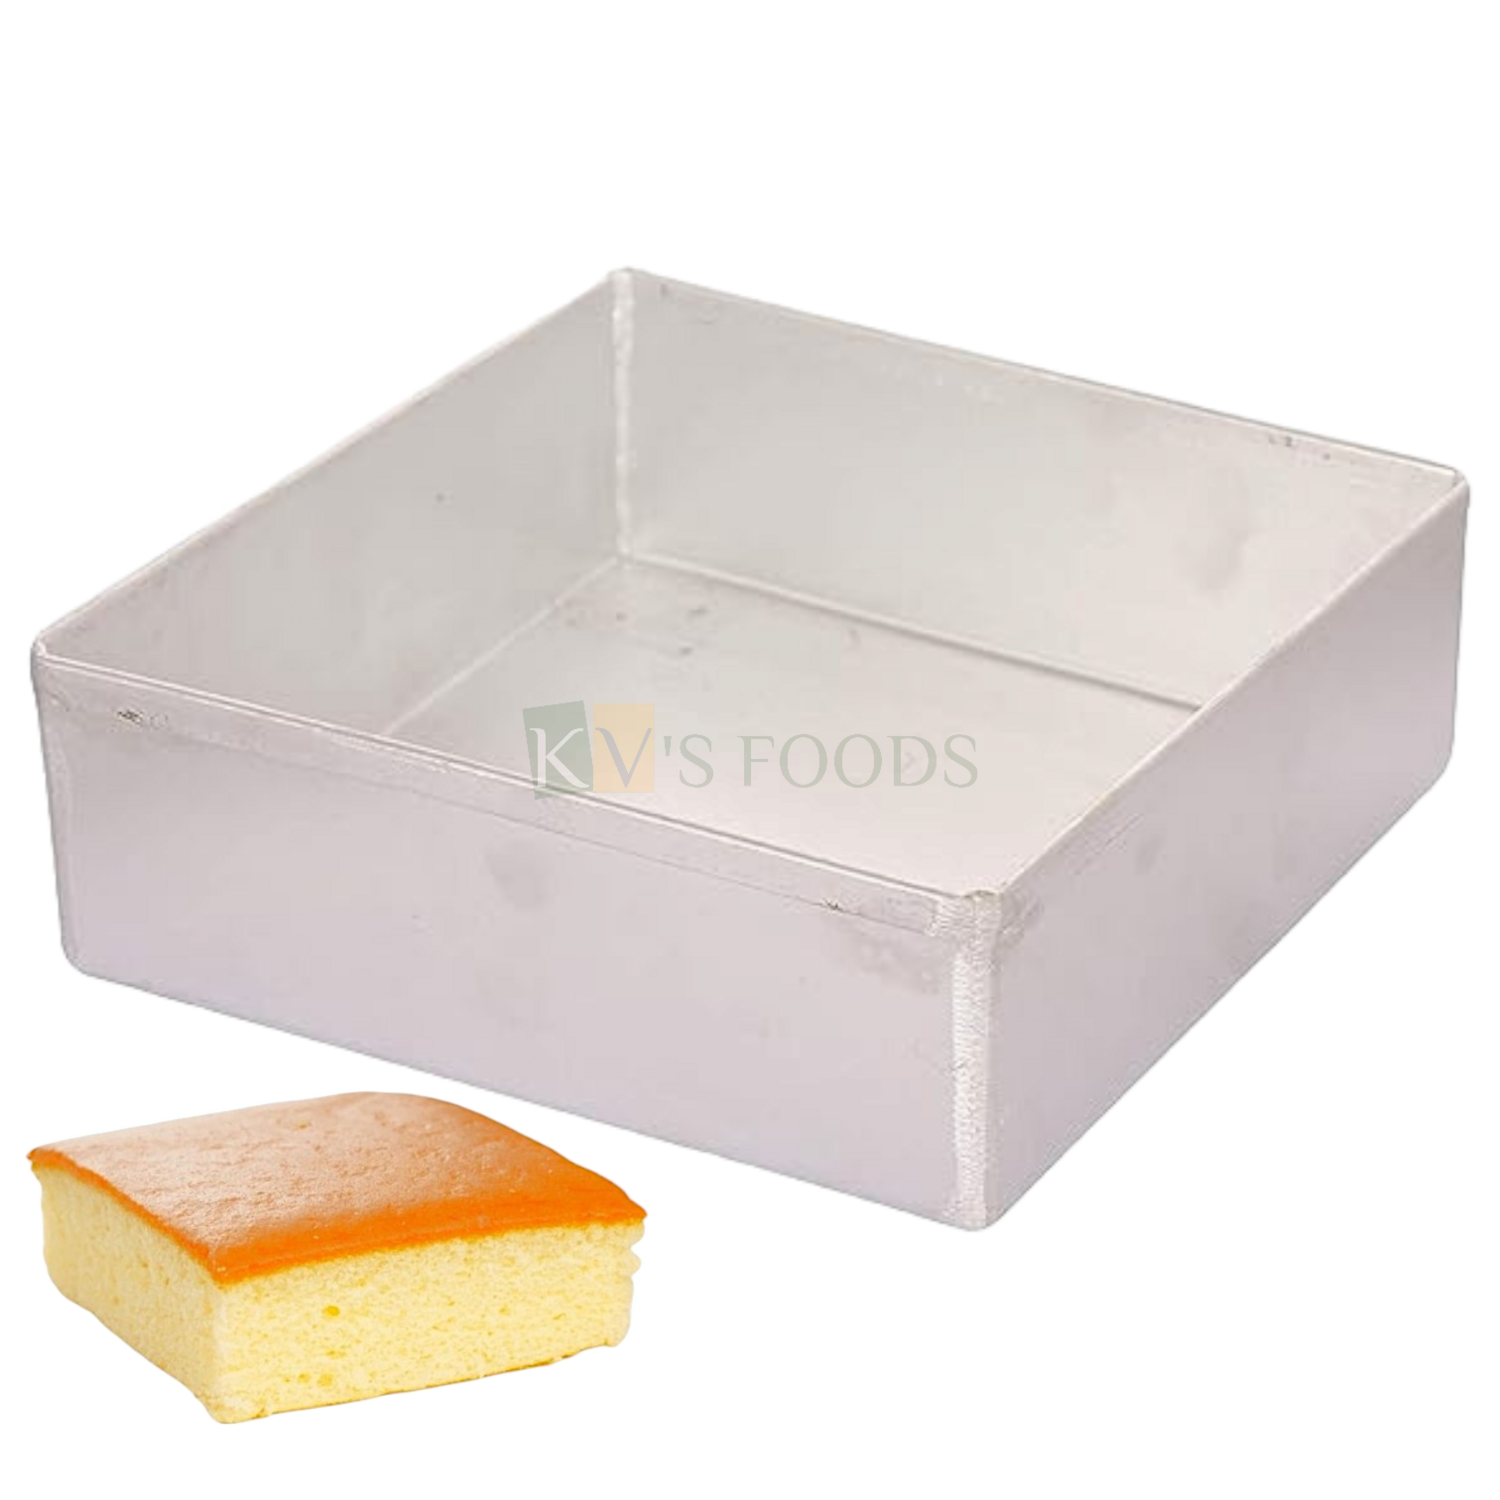 1PC Size 11 x 11 x 2 Inch Capacity ~1.5 Kg Big Aluminium Baking Pan Silver Square Loaf Bread Cake Mould Bakeware Mousse Pudding Cheese Chocolate Fruit Cakes Containers Mold Tins Tray for Ovens